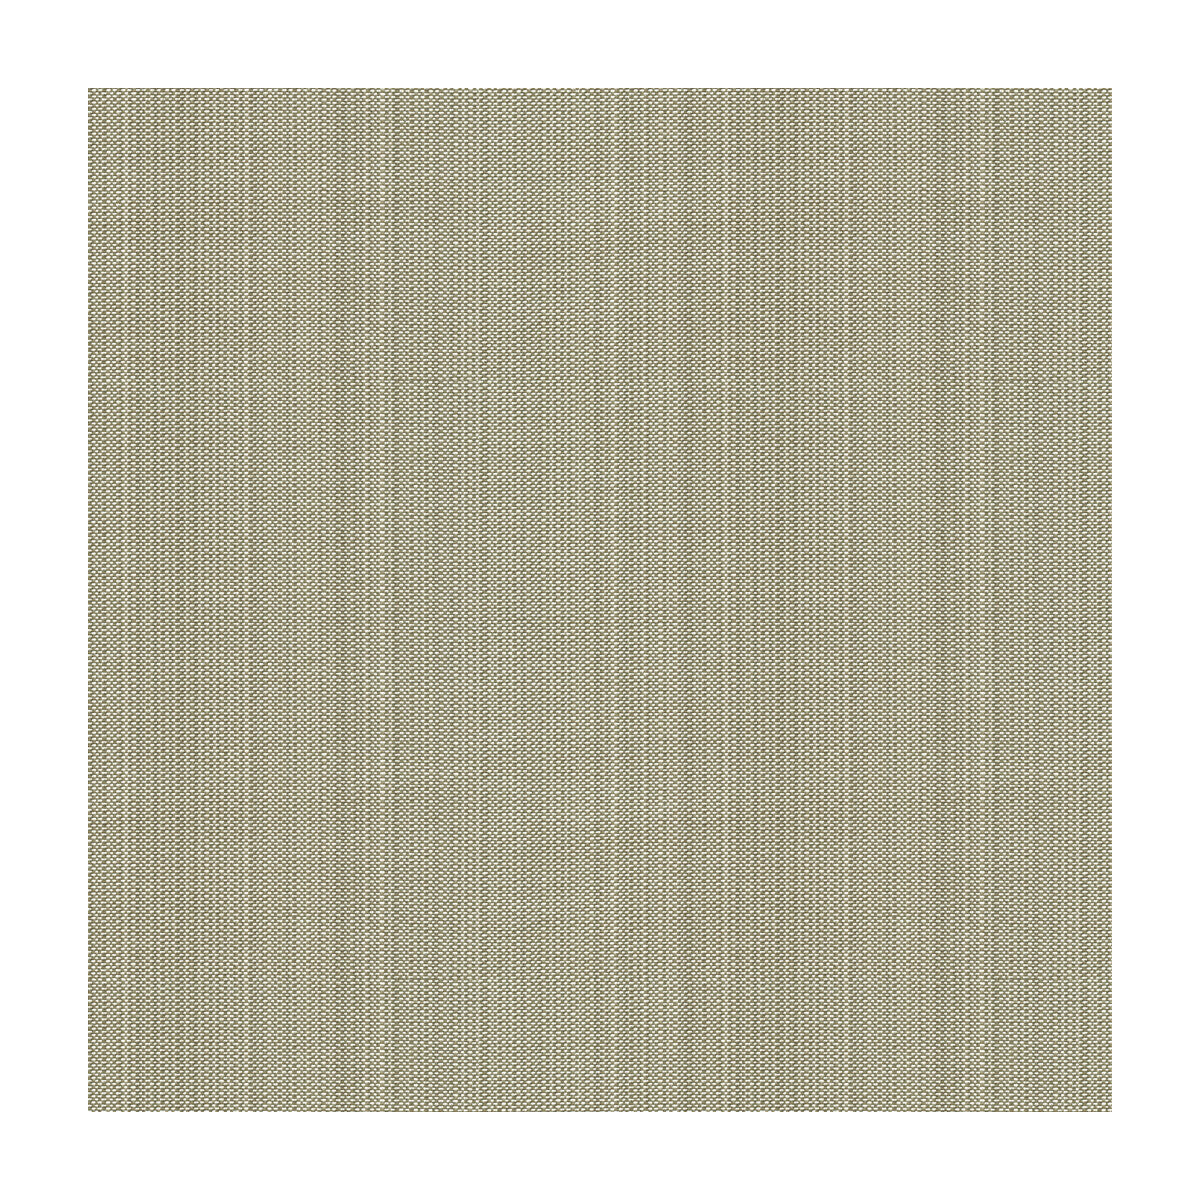 Starboard fabric in gray stone color - pattern 33526.11.0 - by Kravet Design in the Waterworks II collection